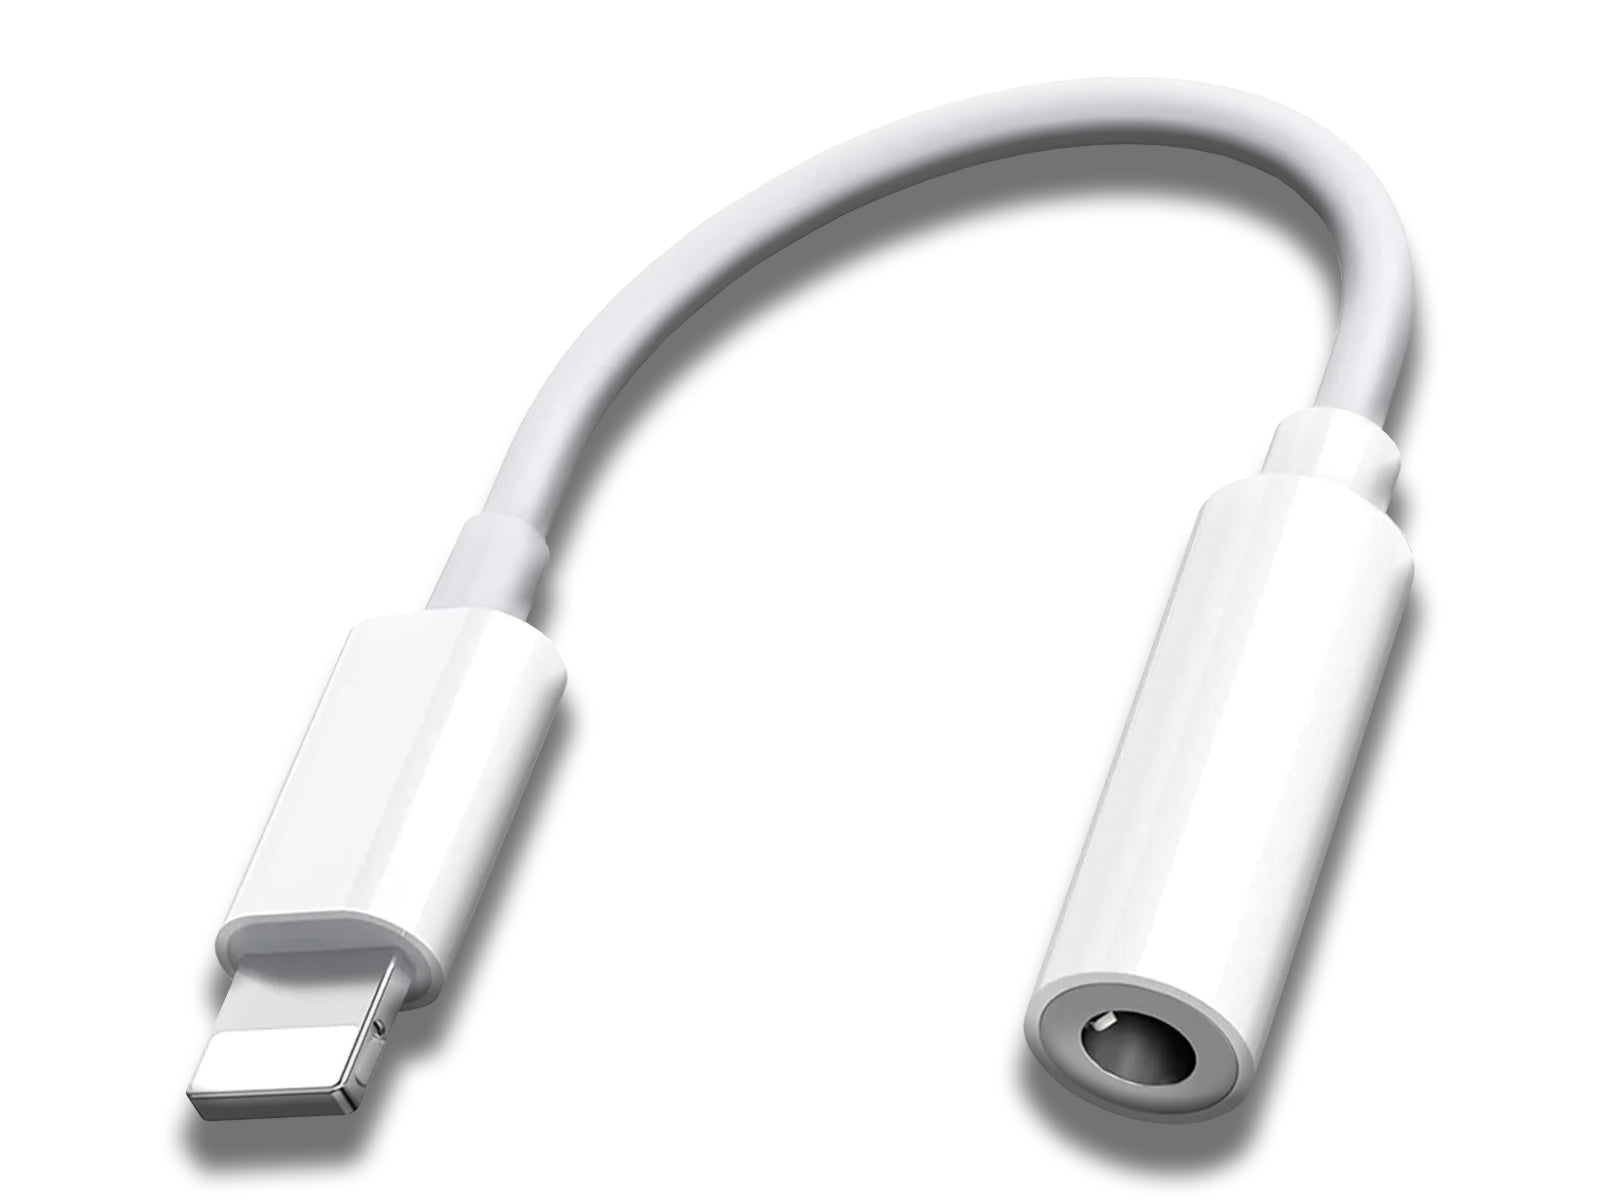 Image shows an overhead view of the Lightning To 3.5mm Headphone Adapter